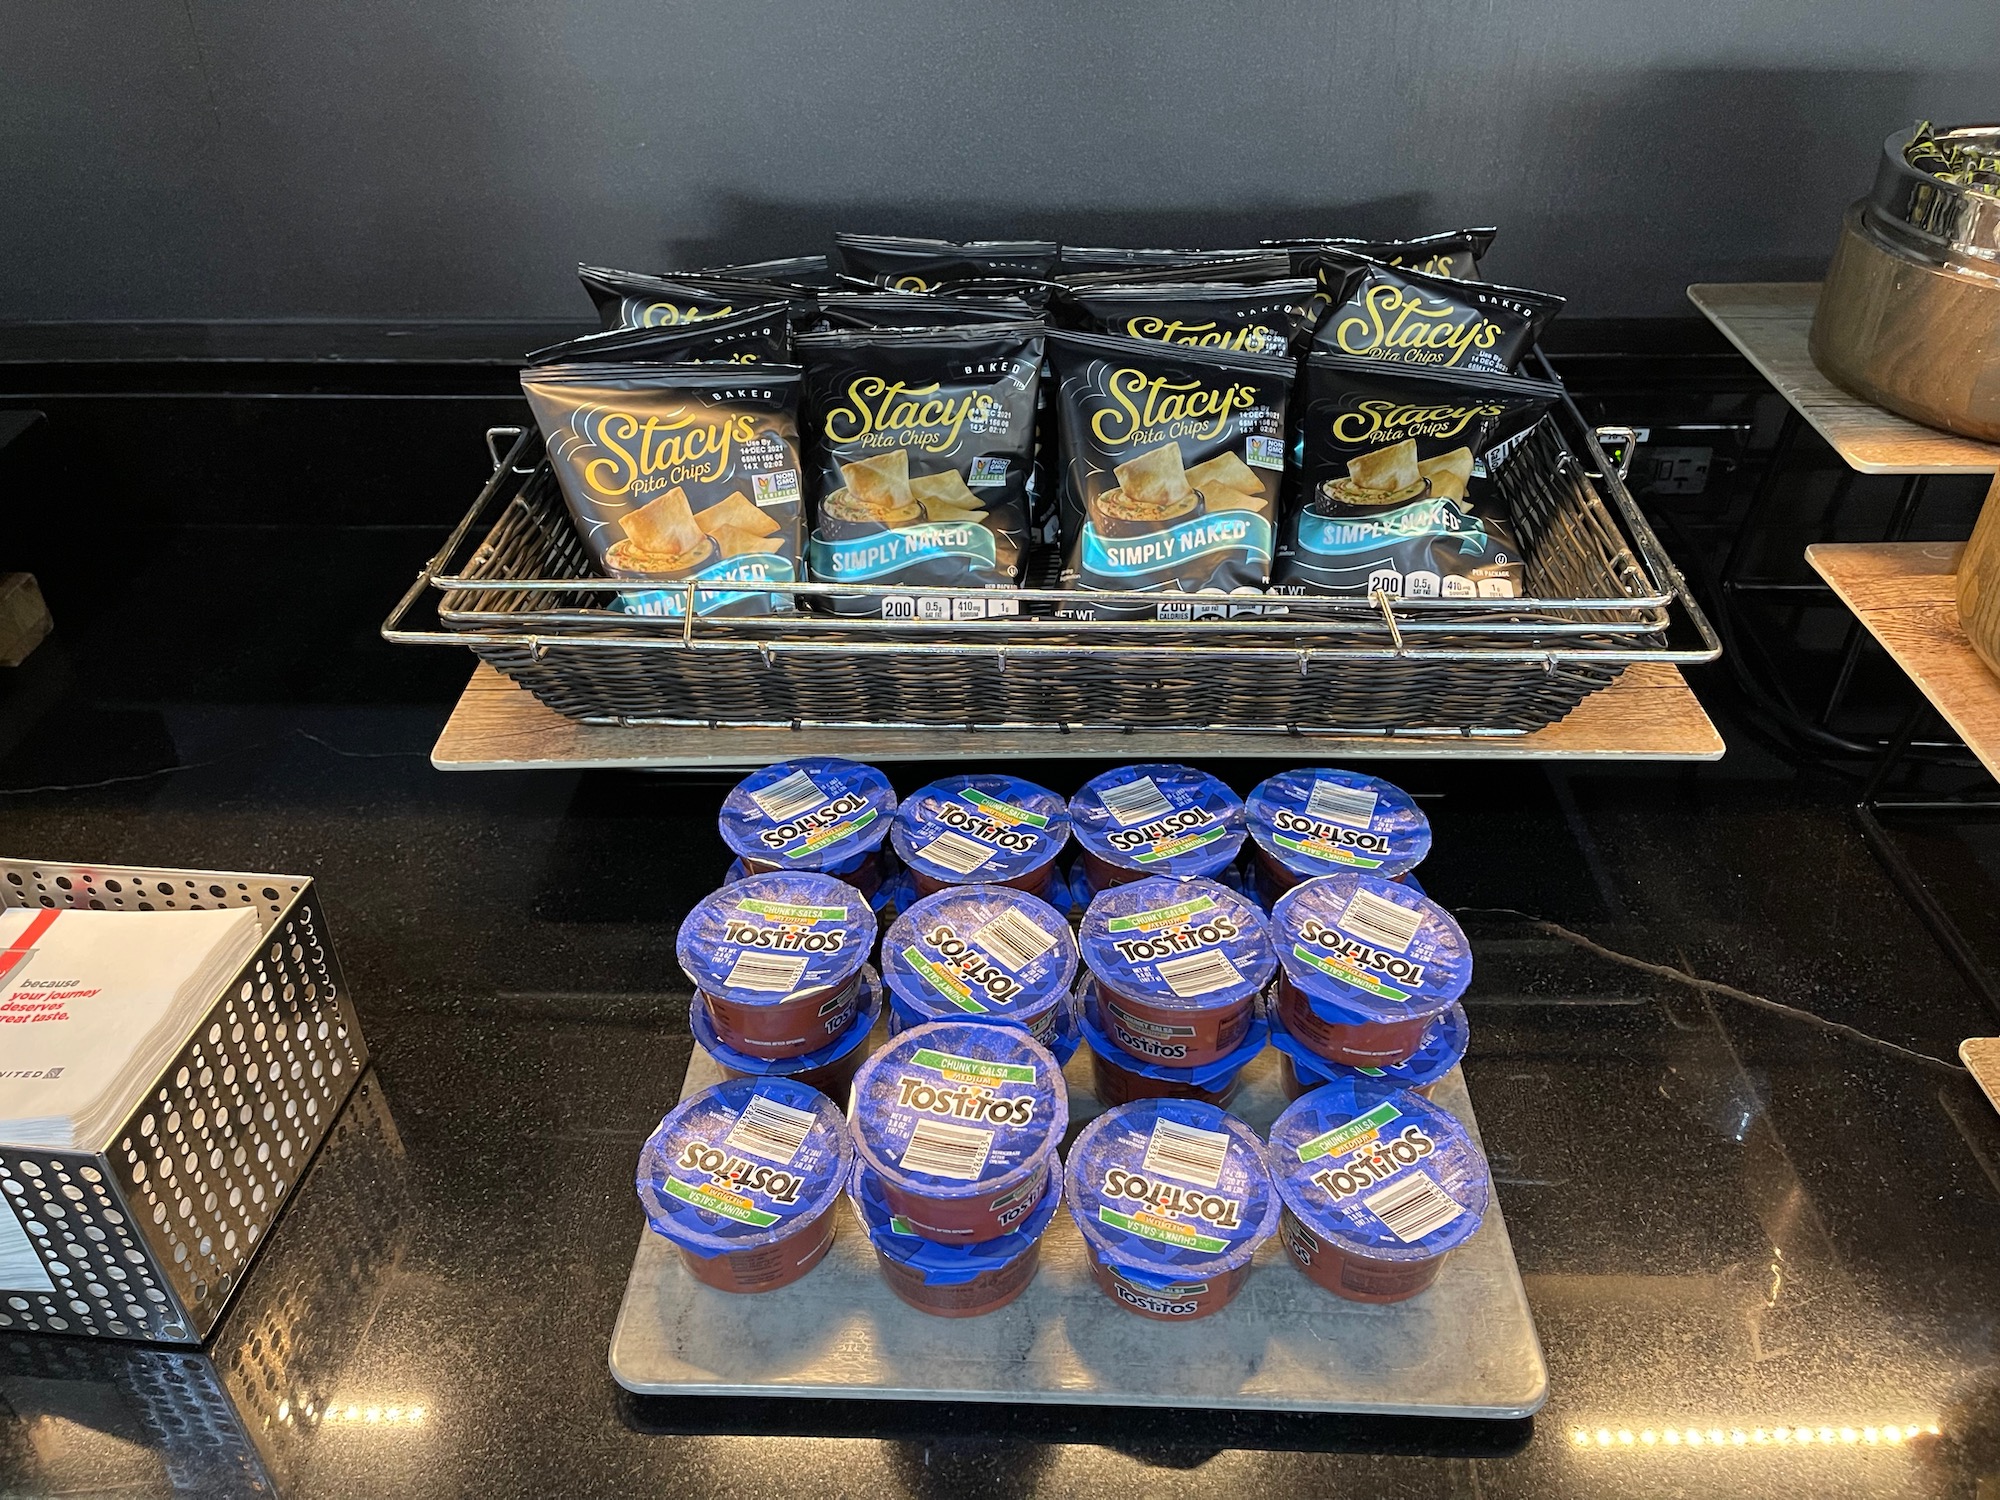 a group of bags of chips and sauces on a tray